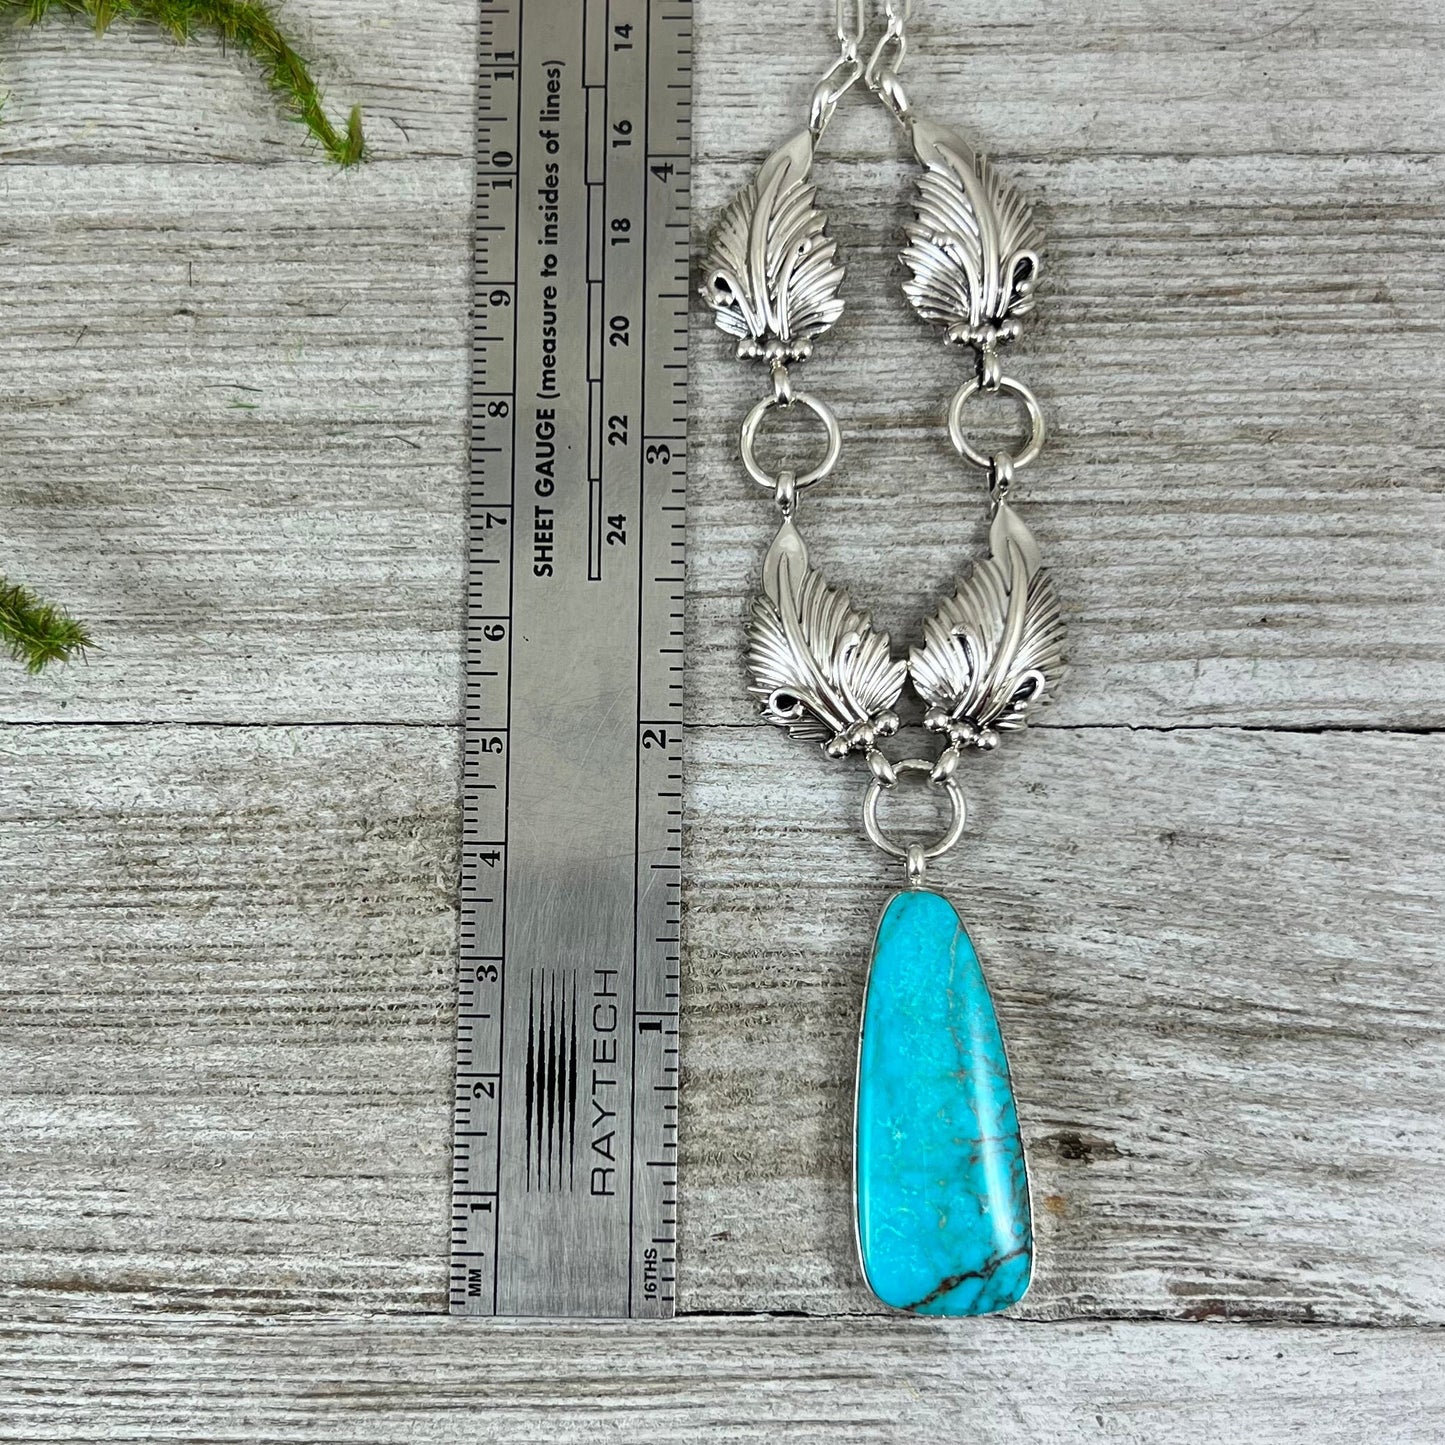 Kingman Turquoise 18" Necklace #1 with Drop Pendant, Real Turquoise, Boho Choker, sterling silver